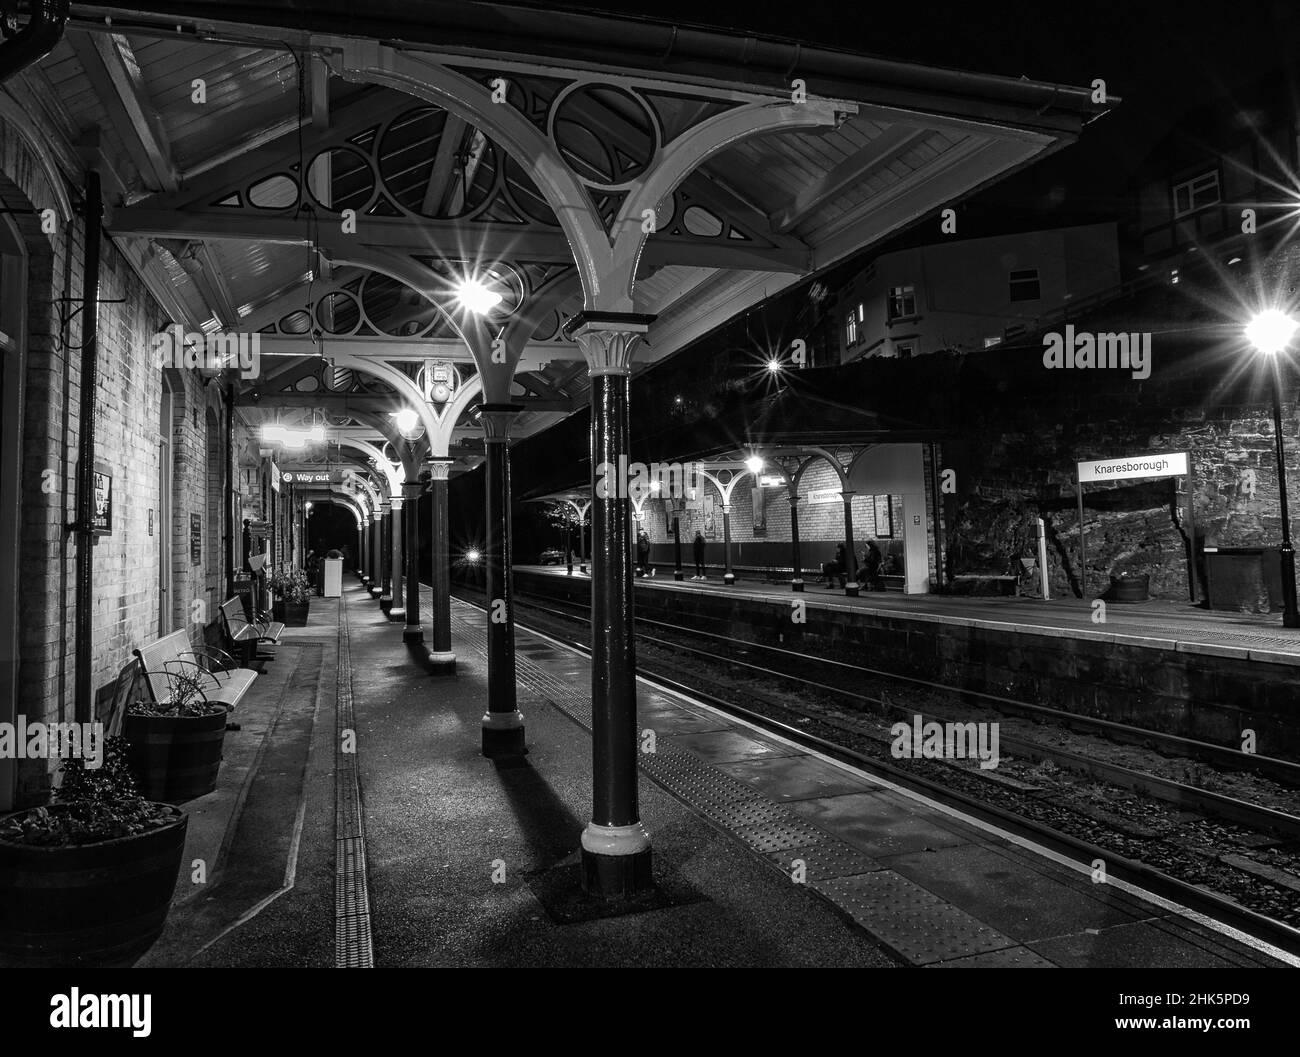 Knaresborough railway station at night. This is a Grade II listed station between York and Harrogate in North Yorkshire. Stock Photo